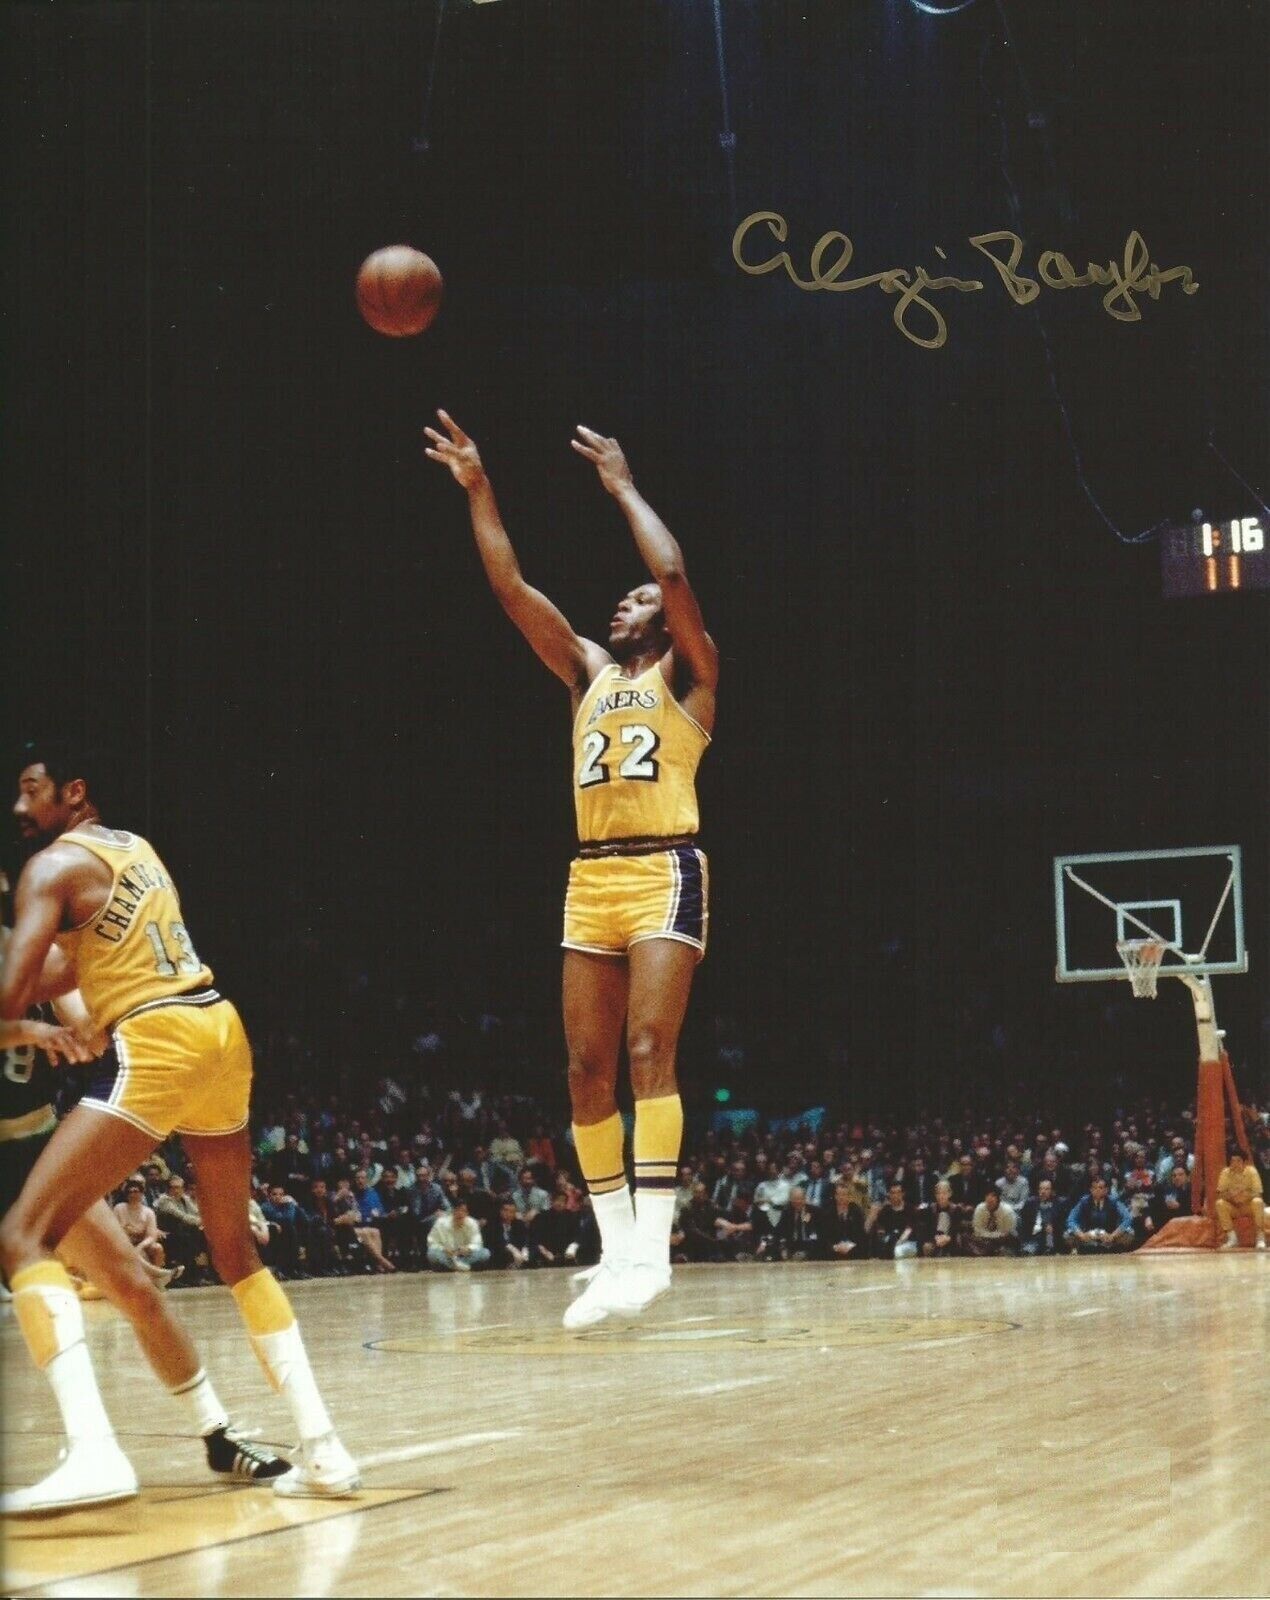 Elgin Baylor Autographed Signed 8x10 Photo Poster painting ( HOF Lakers ) REPRINT